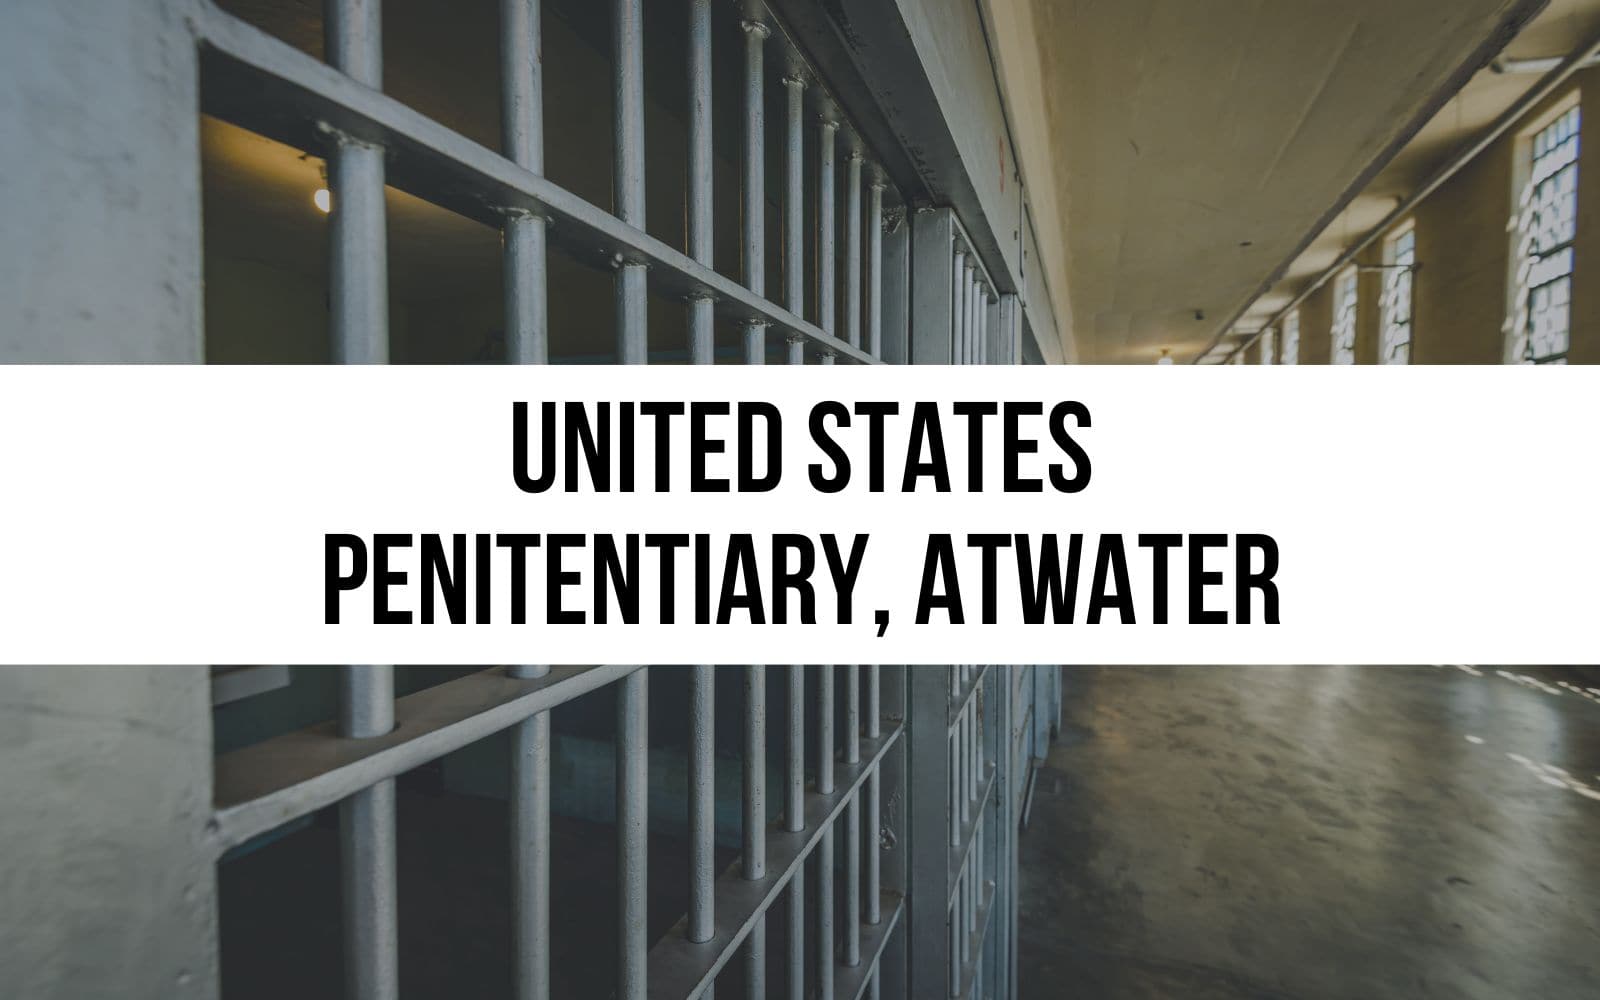 United States Penitentiary, Atwater